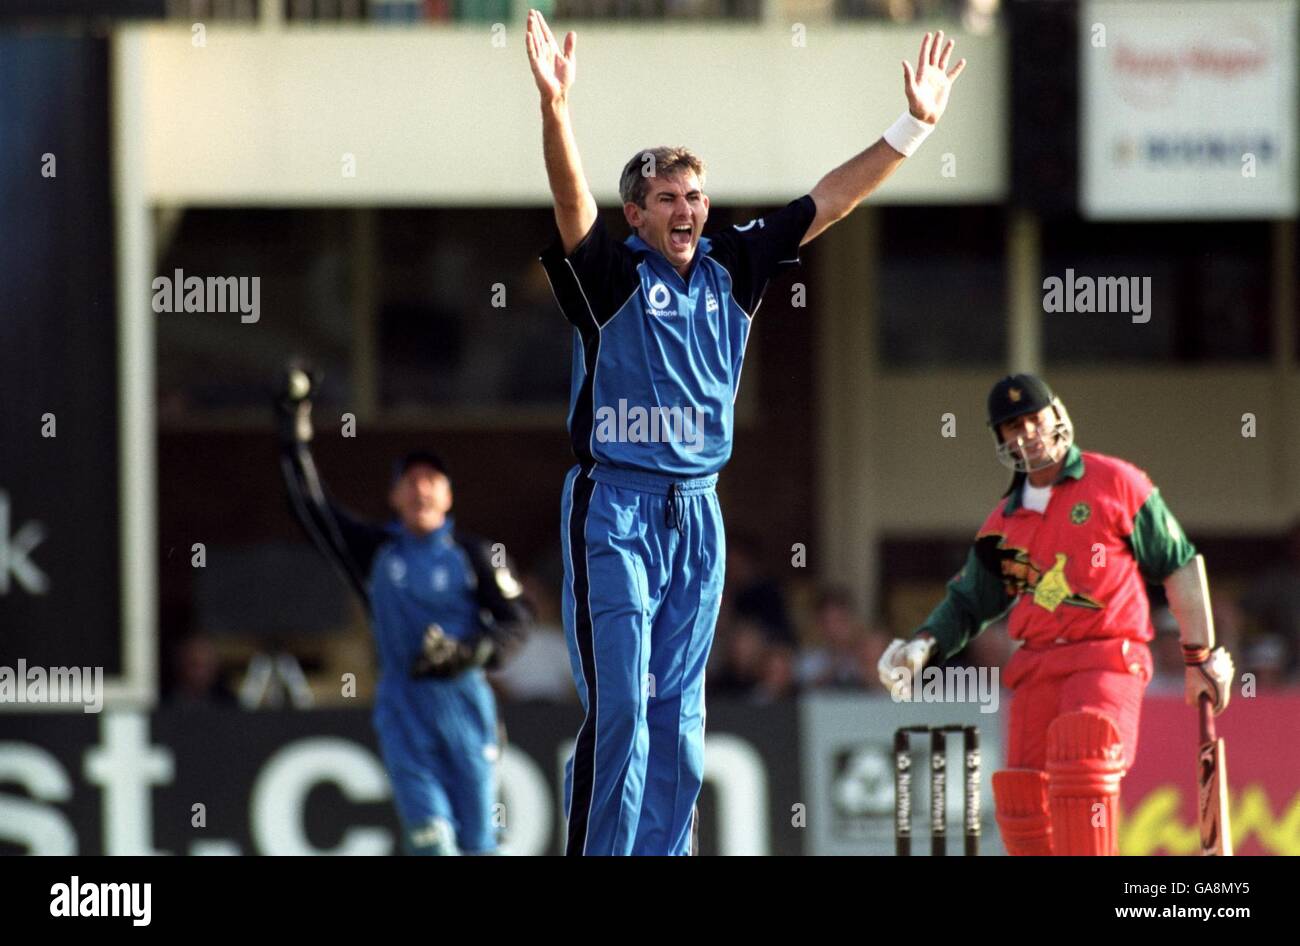 Cricket - The Natwest Series - England v Zimbabwe. England's Andy Caddick appeals for a wicket Stock Photo